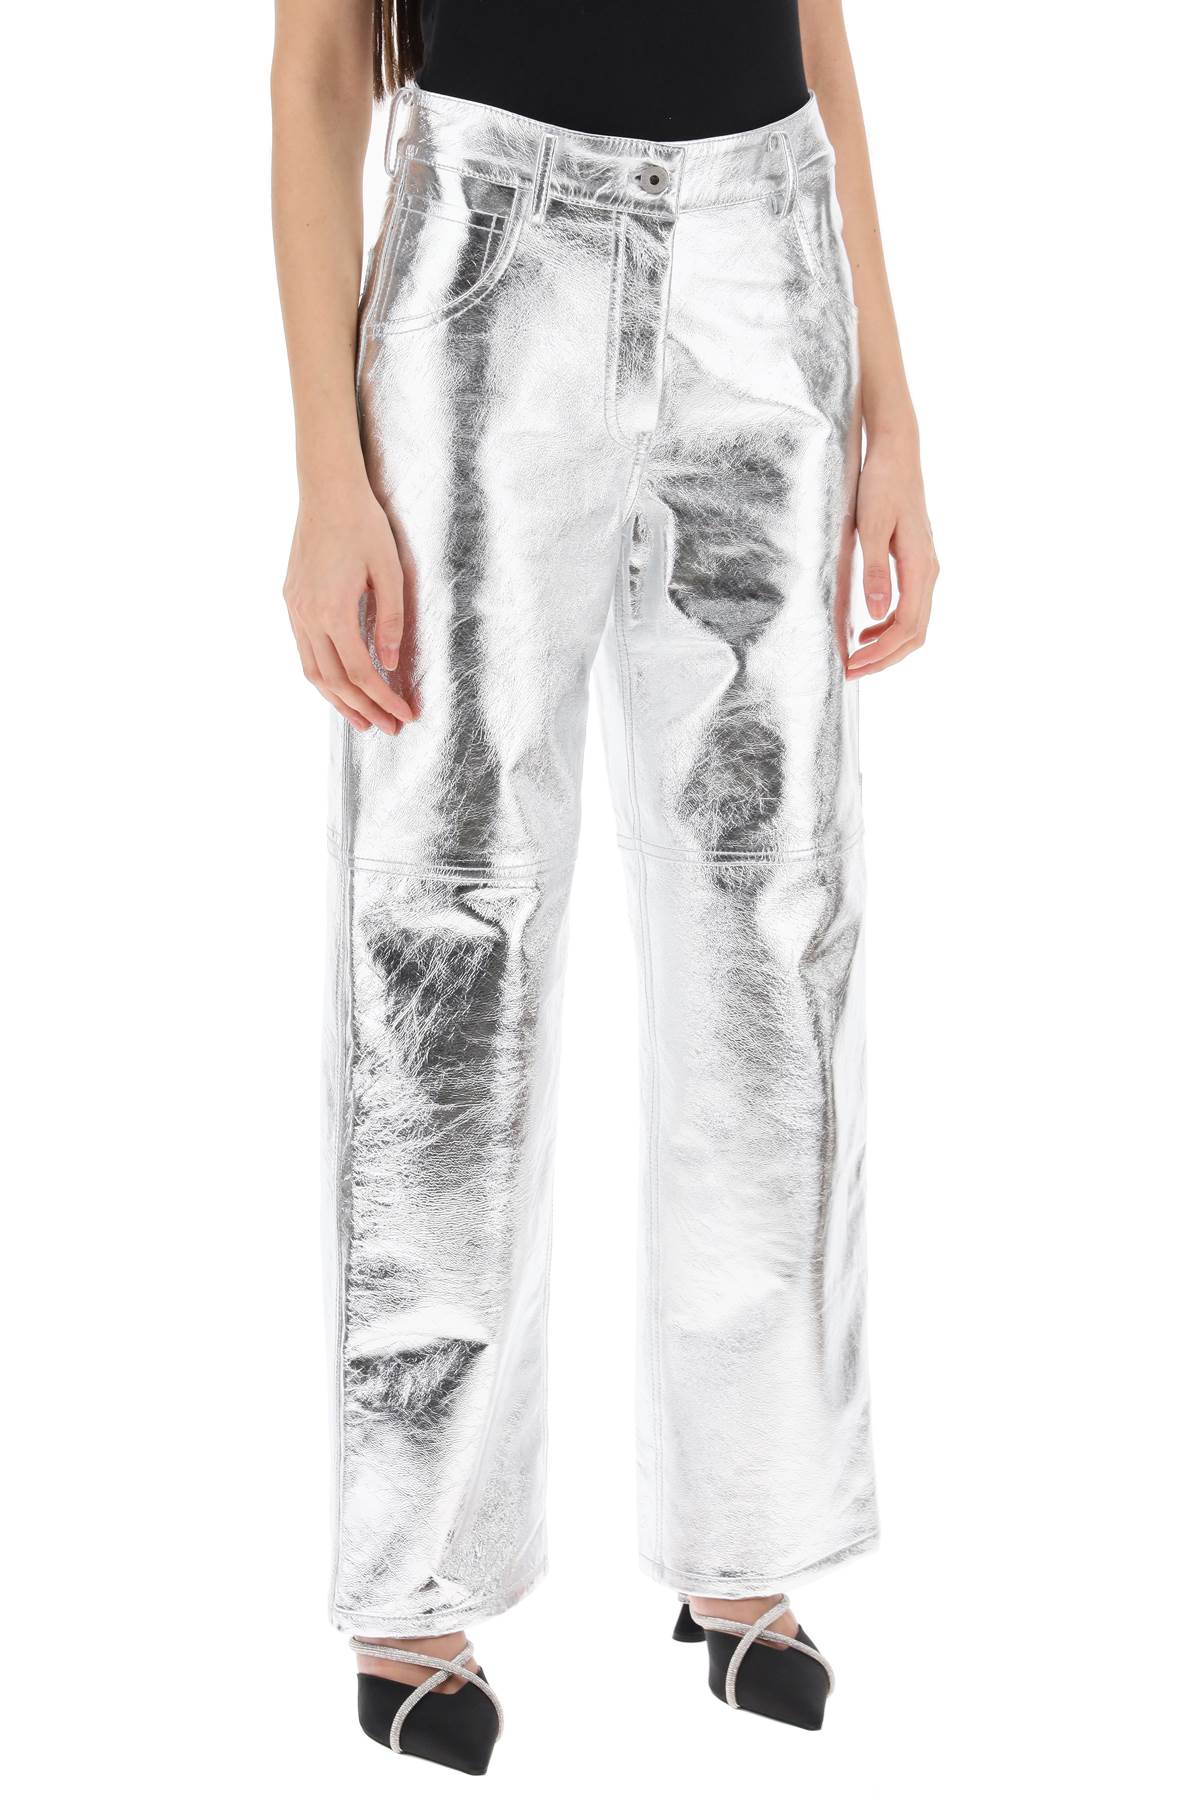 INTERIOR Silver Laminated Leather Pants for Women - Workwear-Inspired Five-Pocket Design